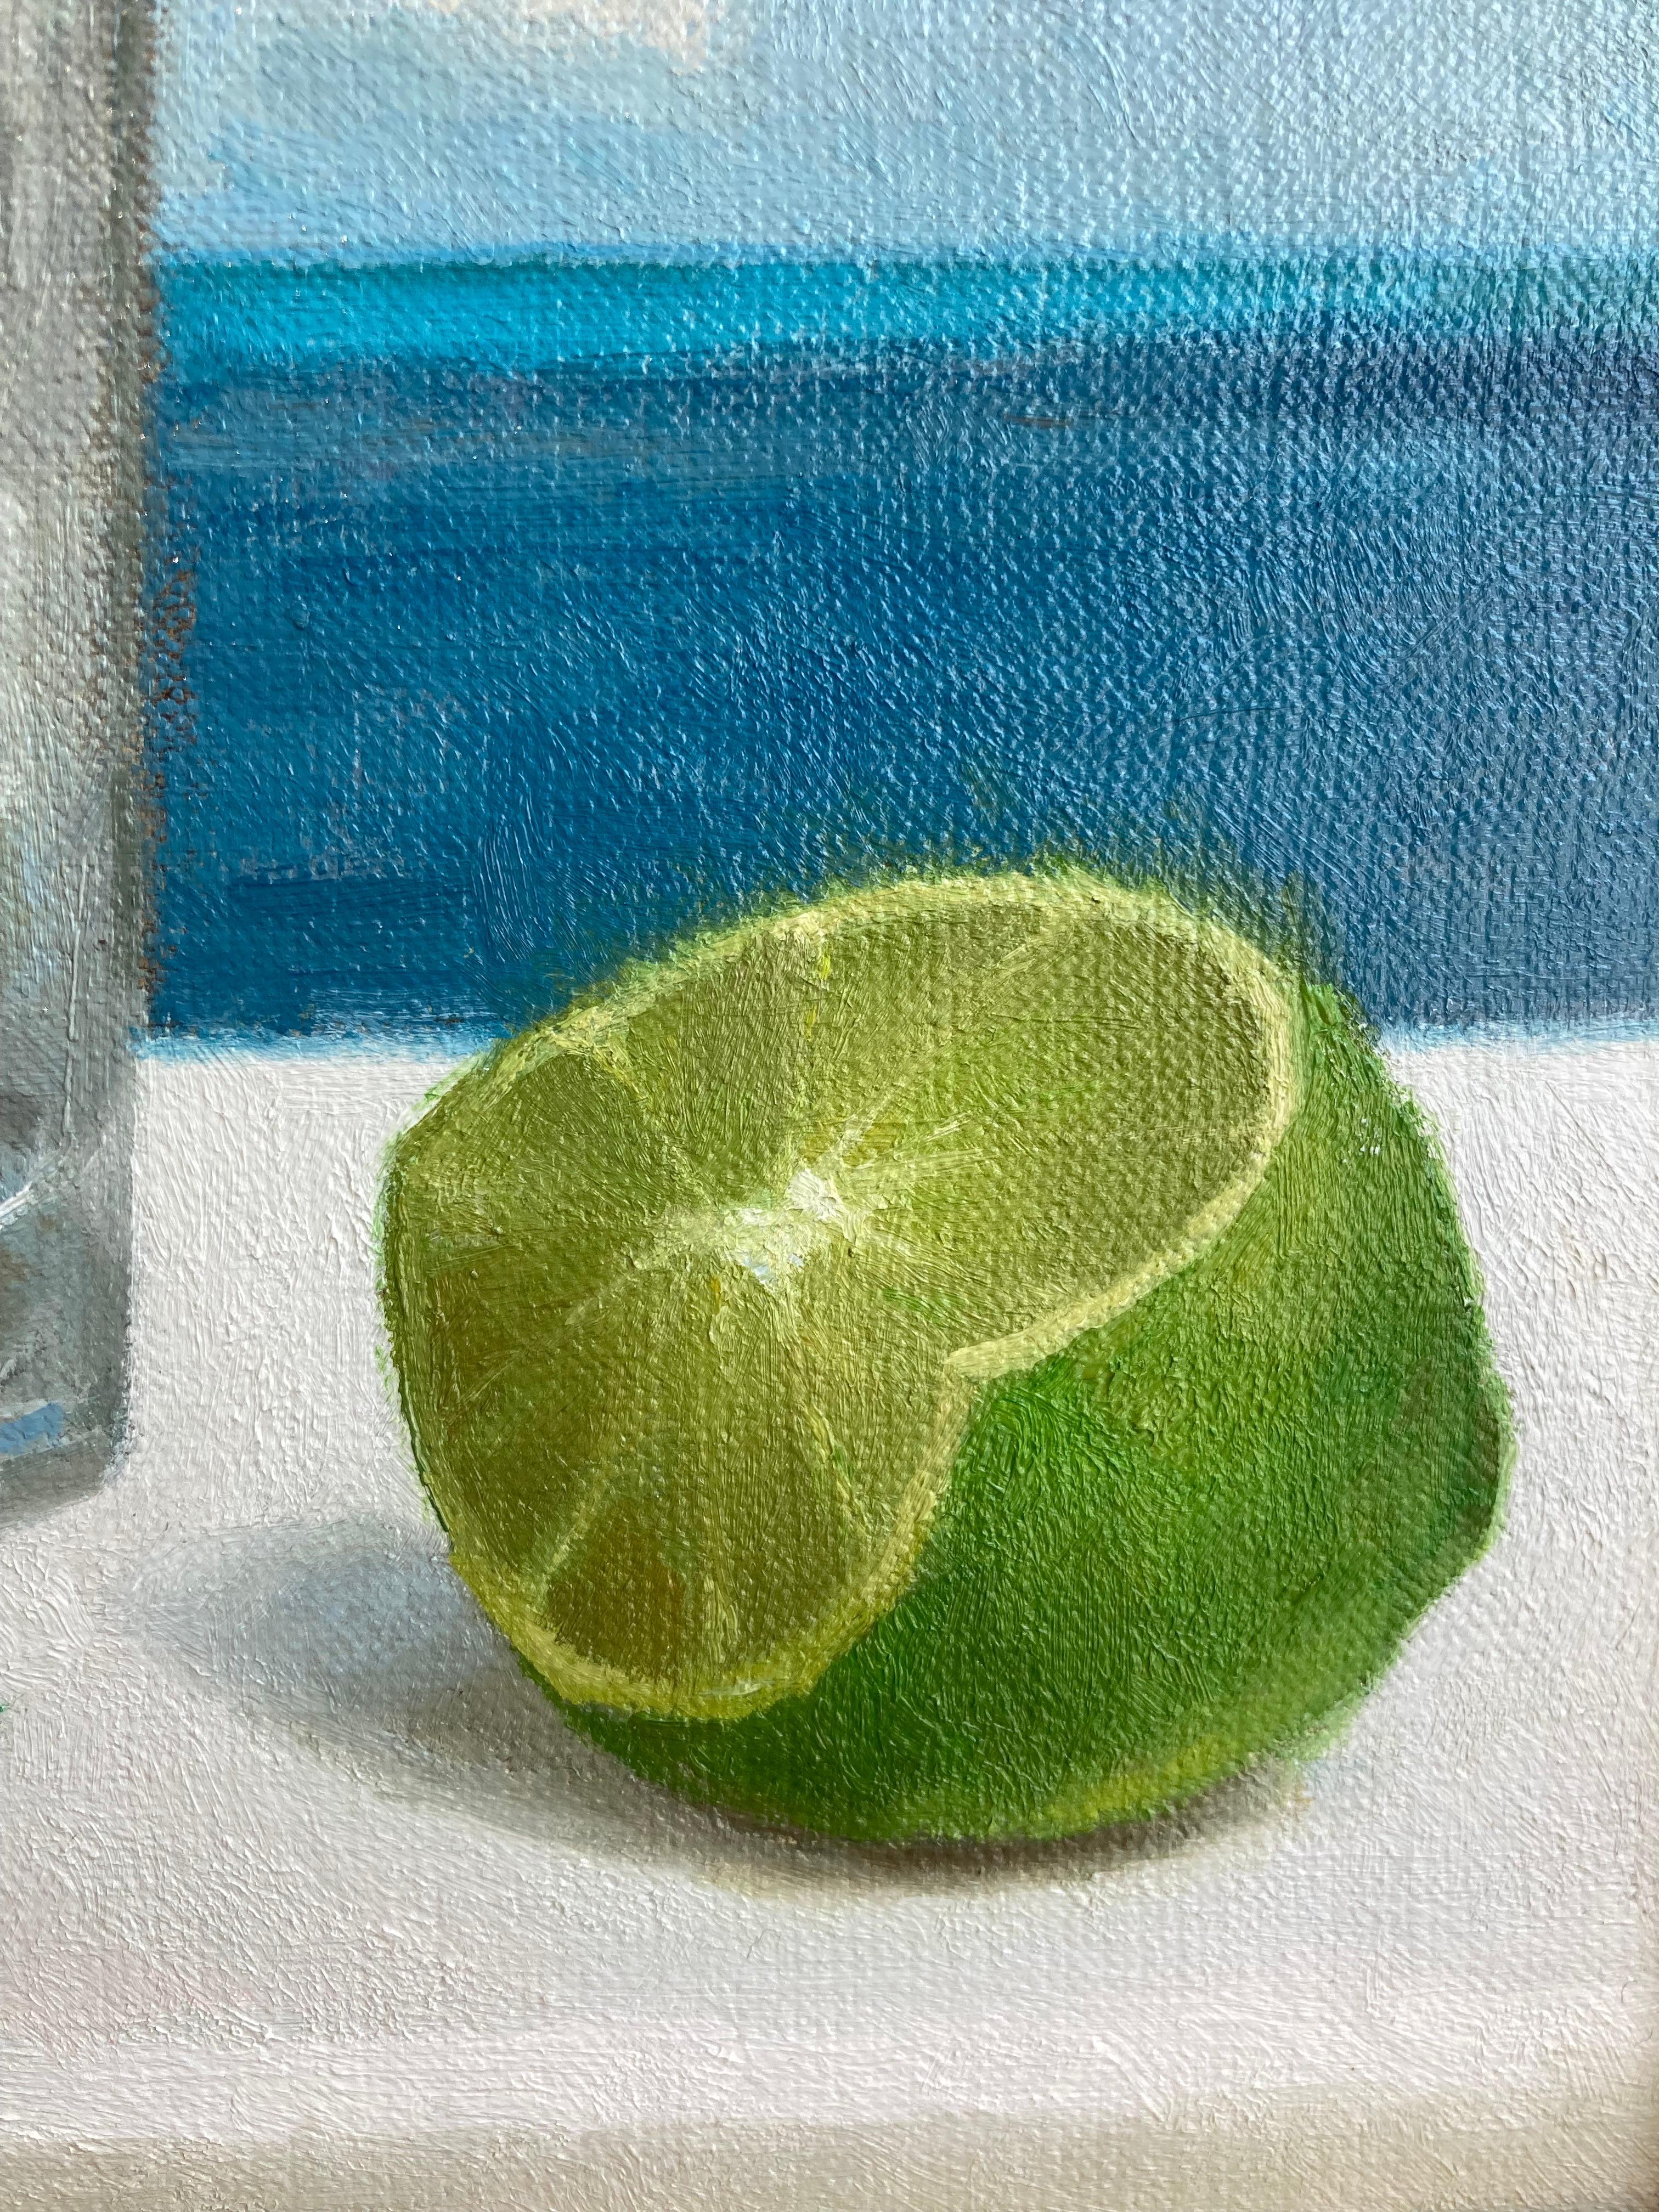 An oil painting by American Realist painter, Steven Levin. Here, Levin depicts a still life that transports viewers to a tropical island with his realist image of gin and tonic against a seascape background. Framed in a simple black frame.
